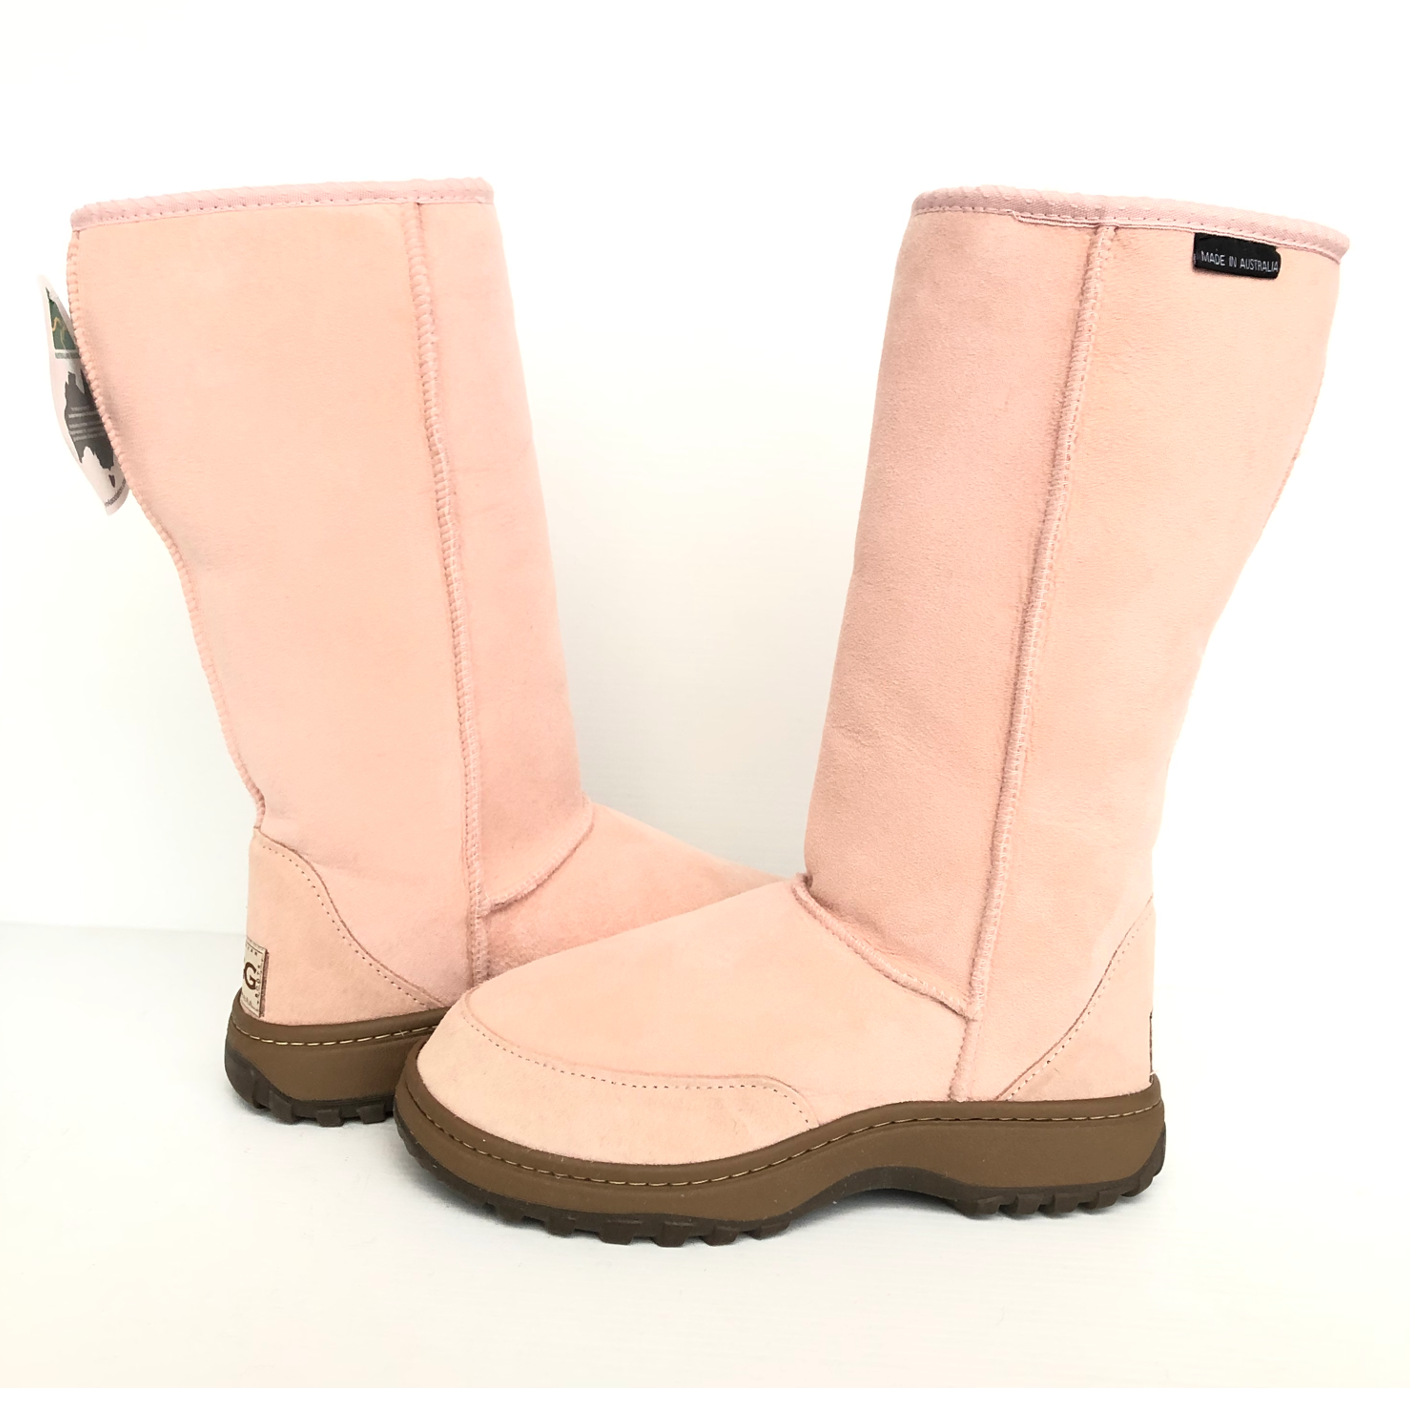 Outdoor Tall Boots in Pale Pink. Women's AU10